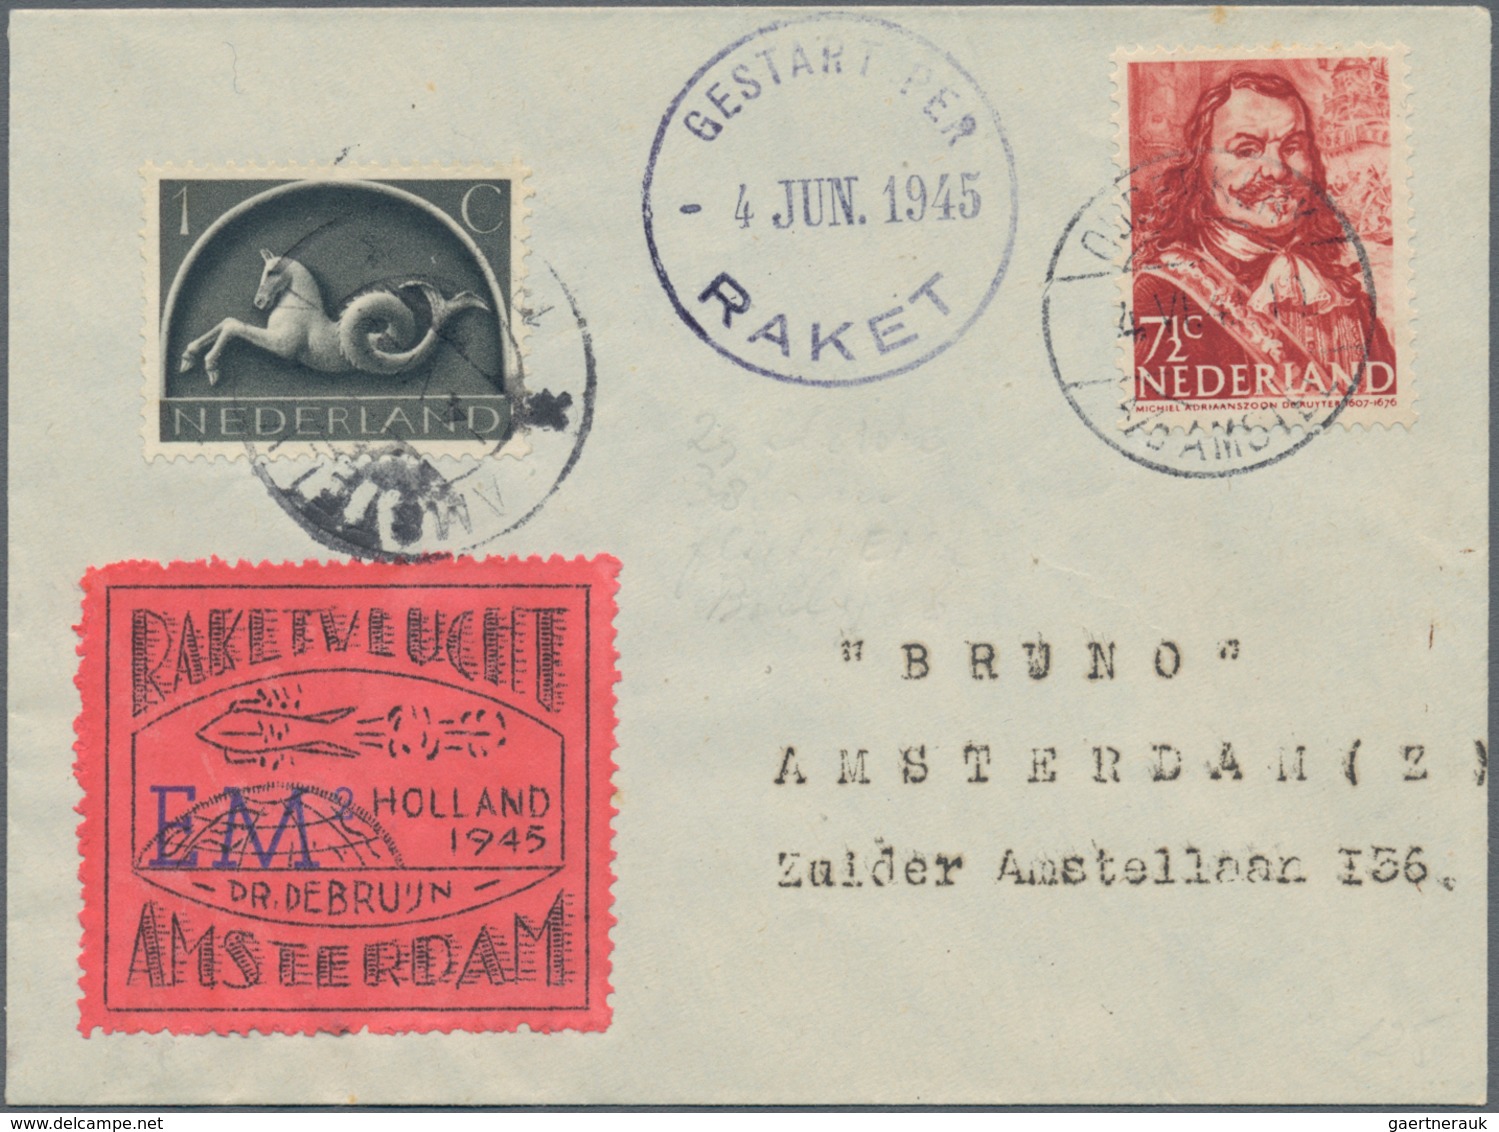 Raketenpost: 1945-1960 Rocket Mail: Specialized collection of 32 covers of Dutch rocket mail and 142